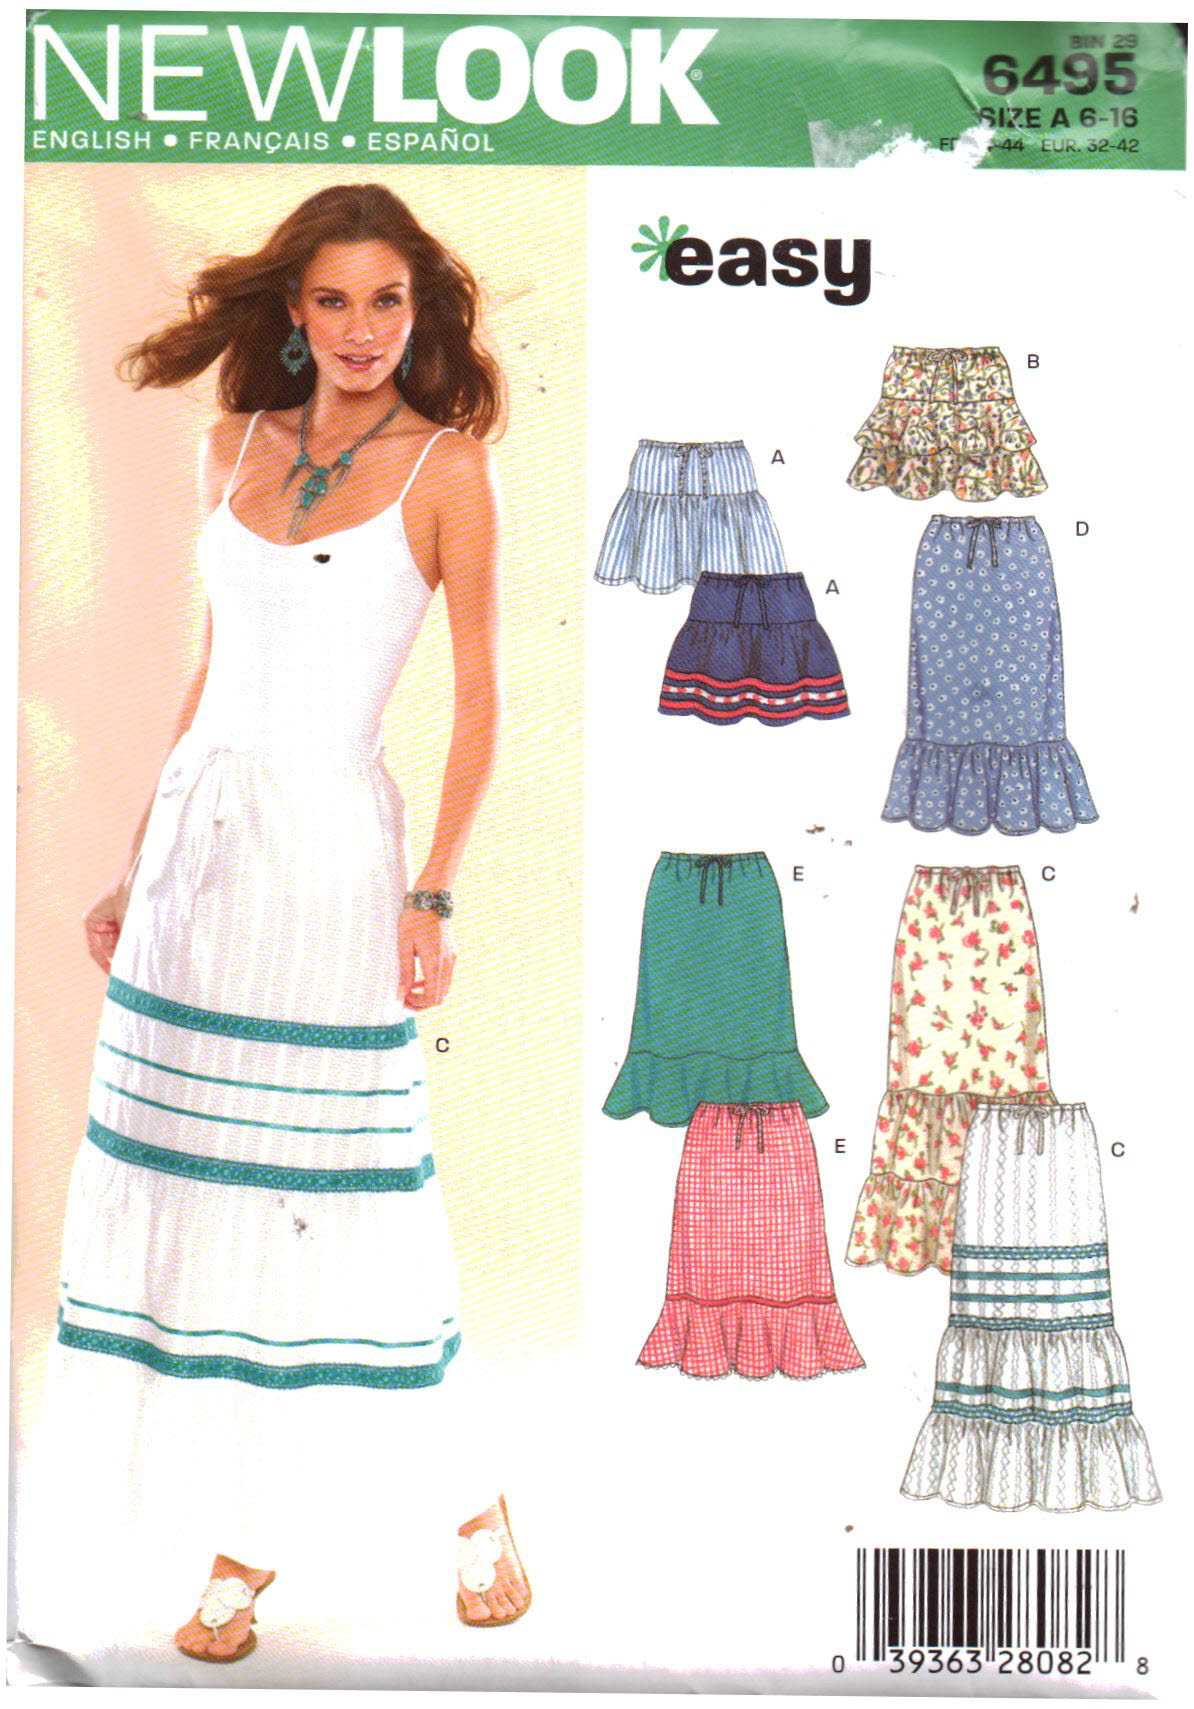 New Look 6495 Skirts Size: A 6-16 Uncut Sewing Pattern